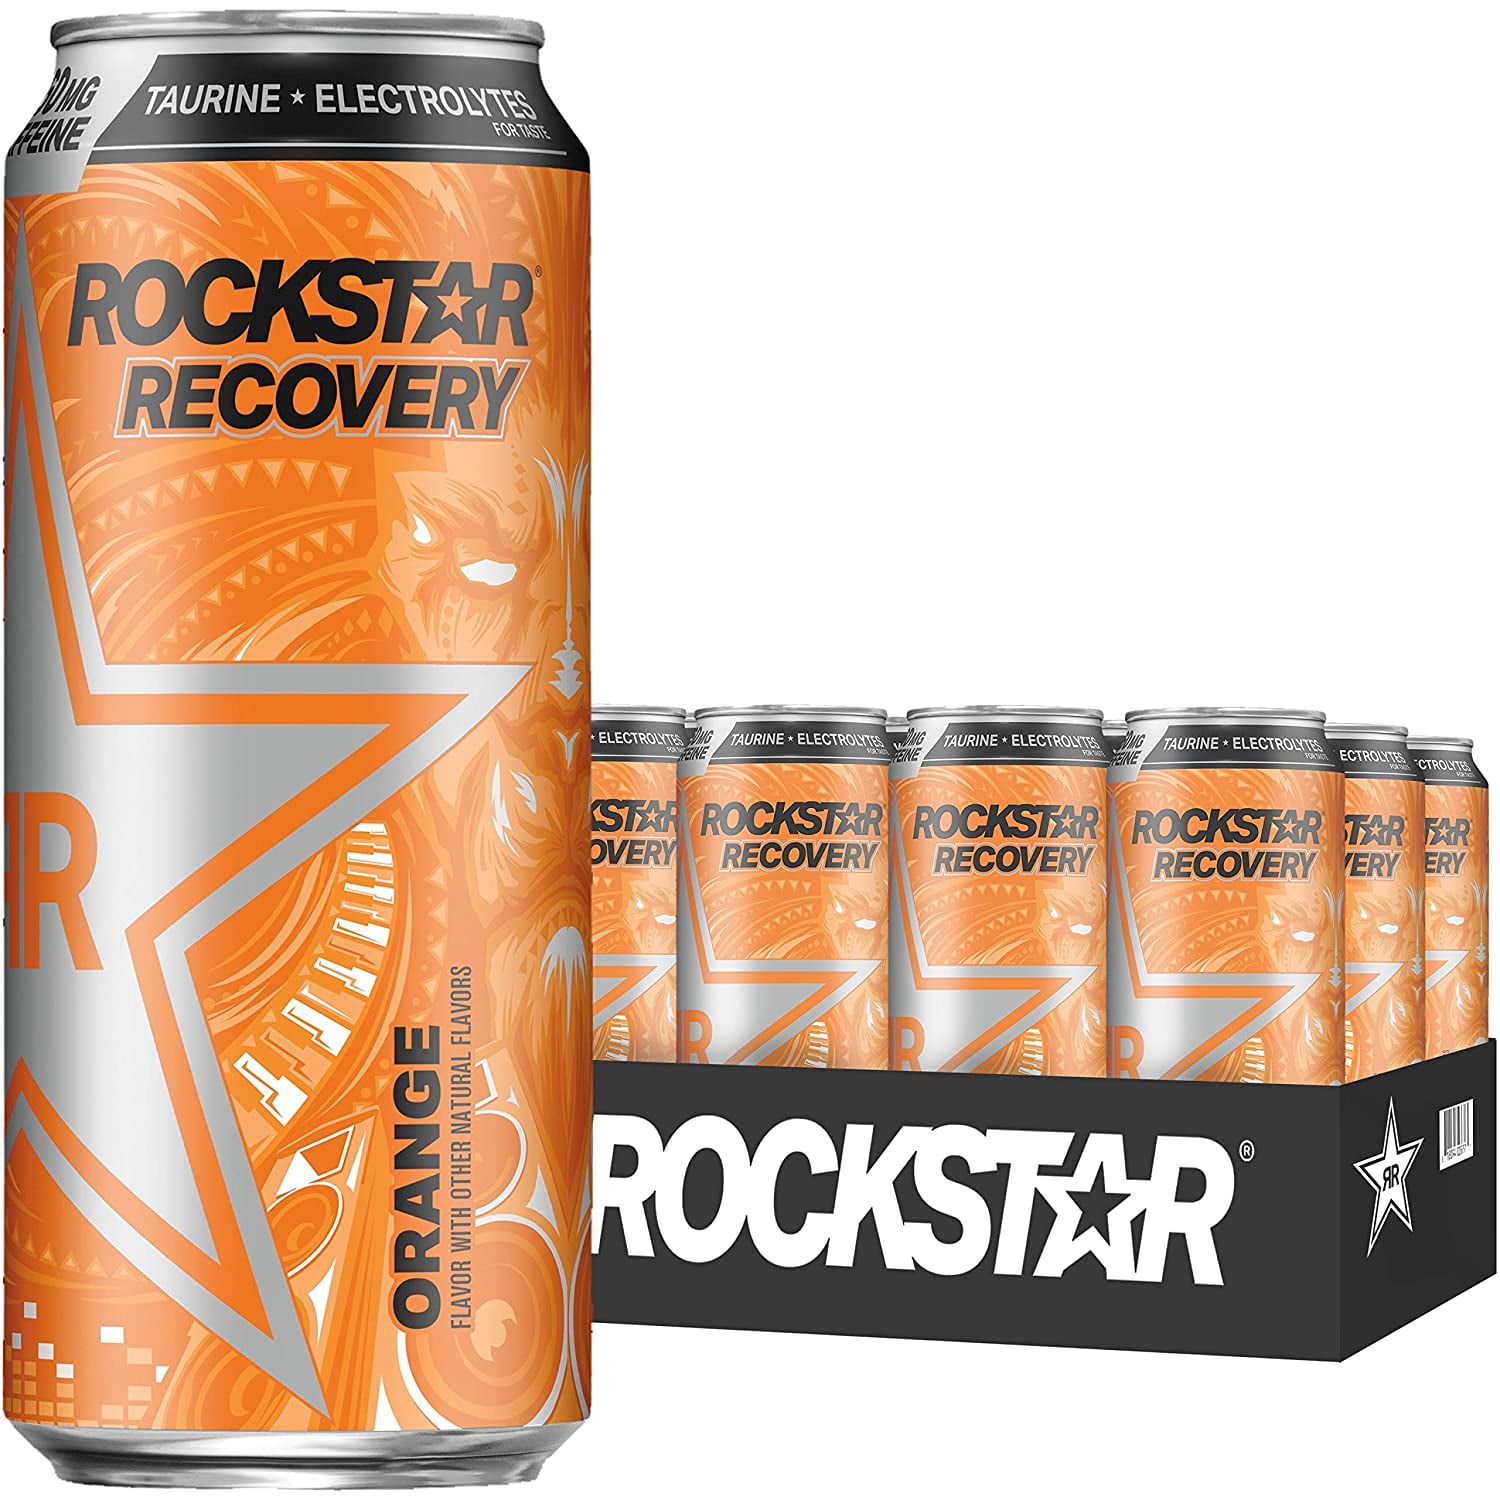 Rockstar Energy Drink with Caffeine Taurine and Electrolytes, Recovery Orange, 12 Count